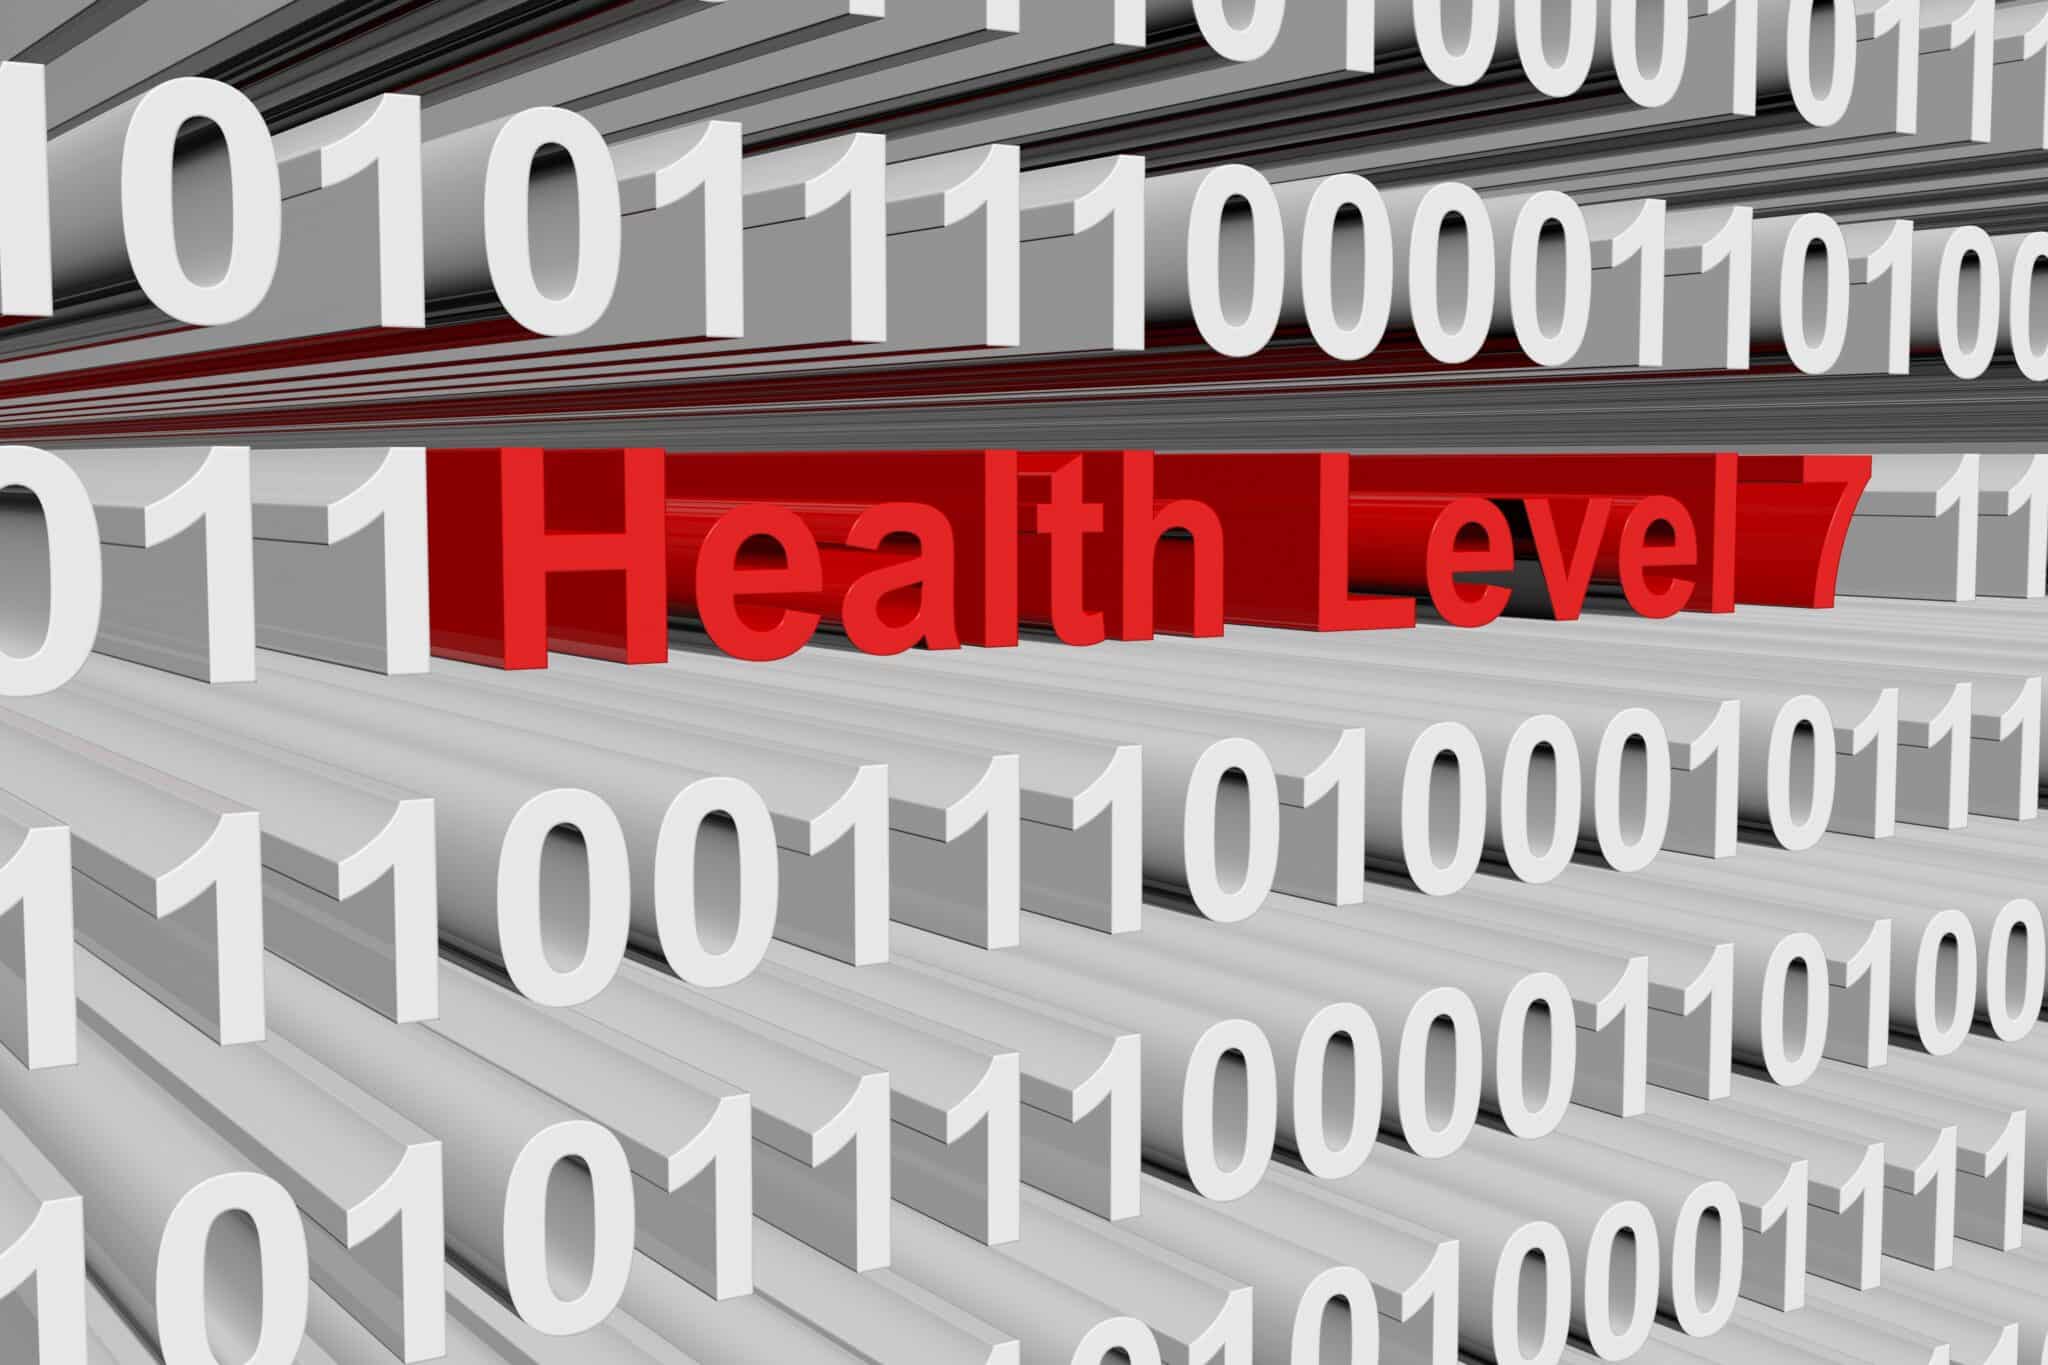 Health Level 7 intertwined with binary code; representing medical transcription data exchanges.